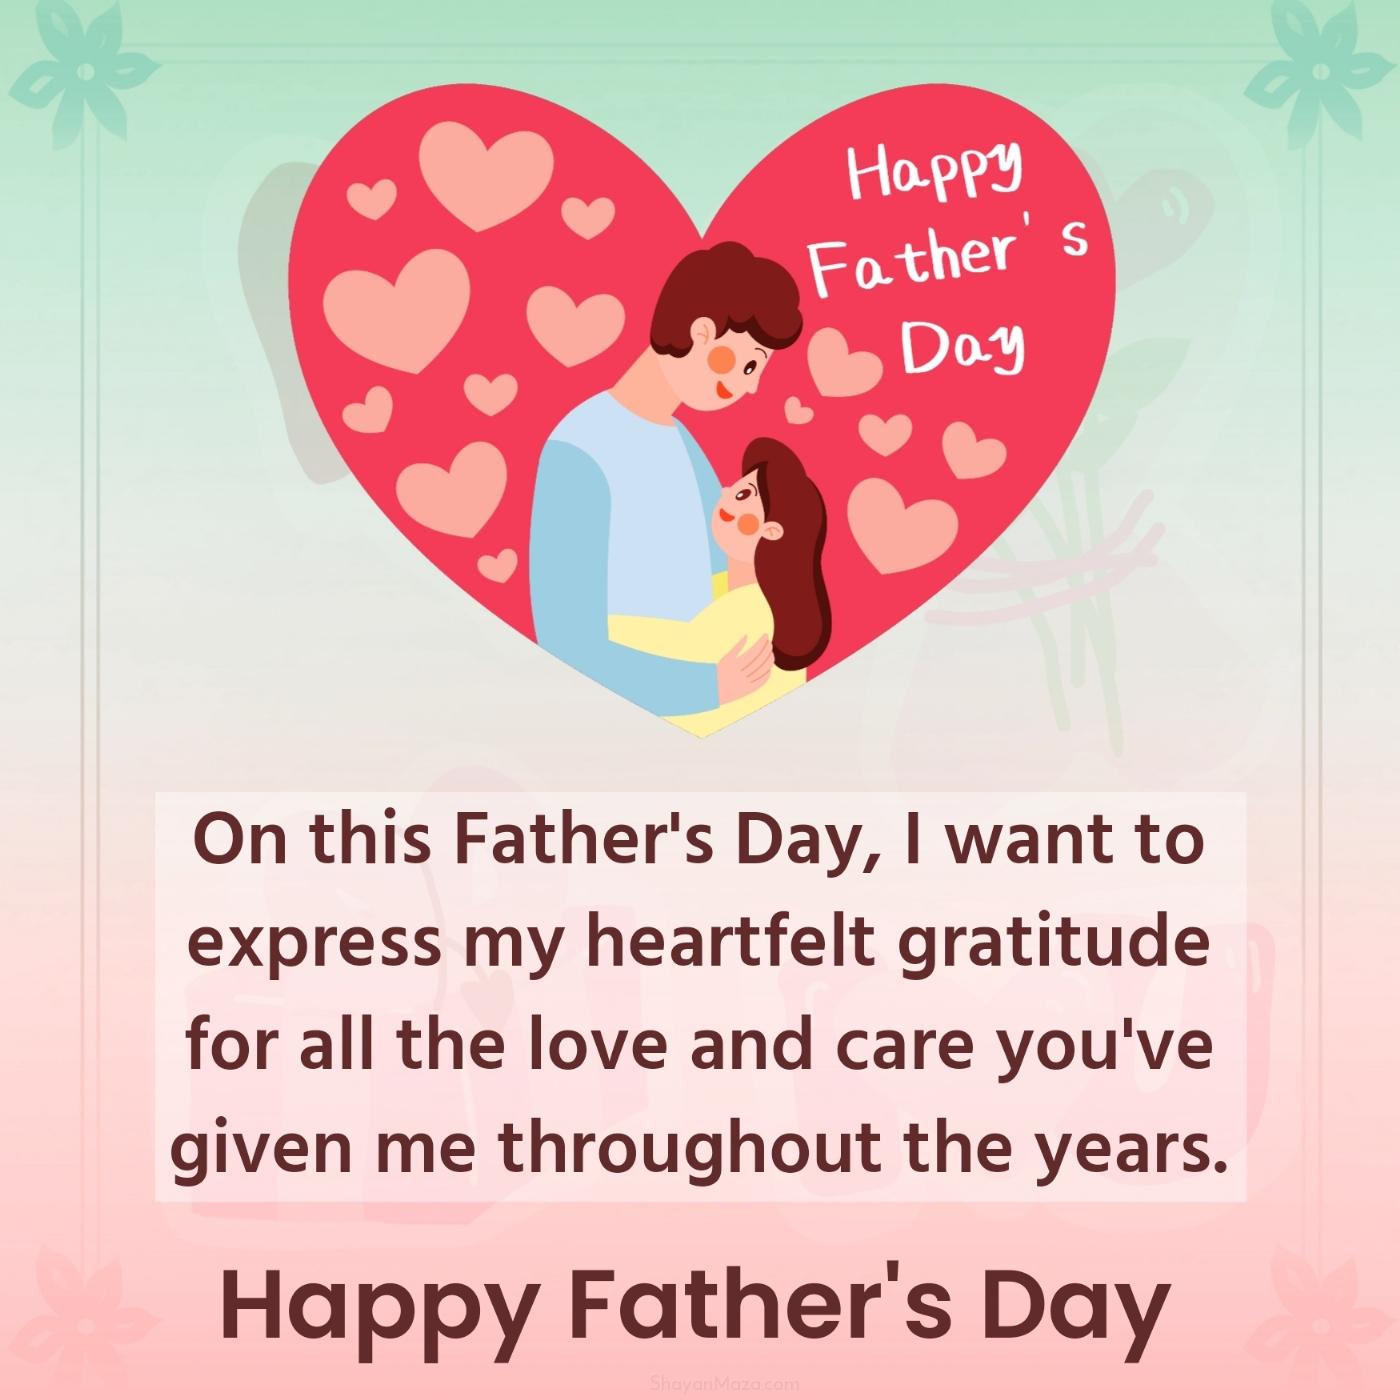 On this Father's Day I want to express my heartfelt gratitude